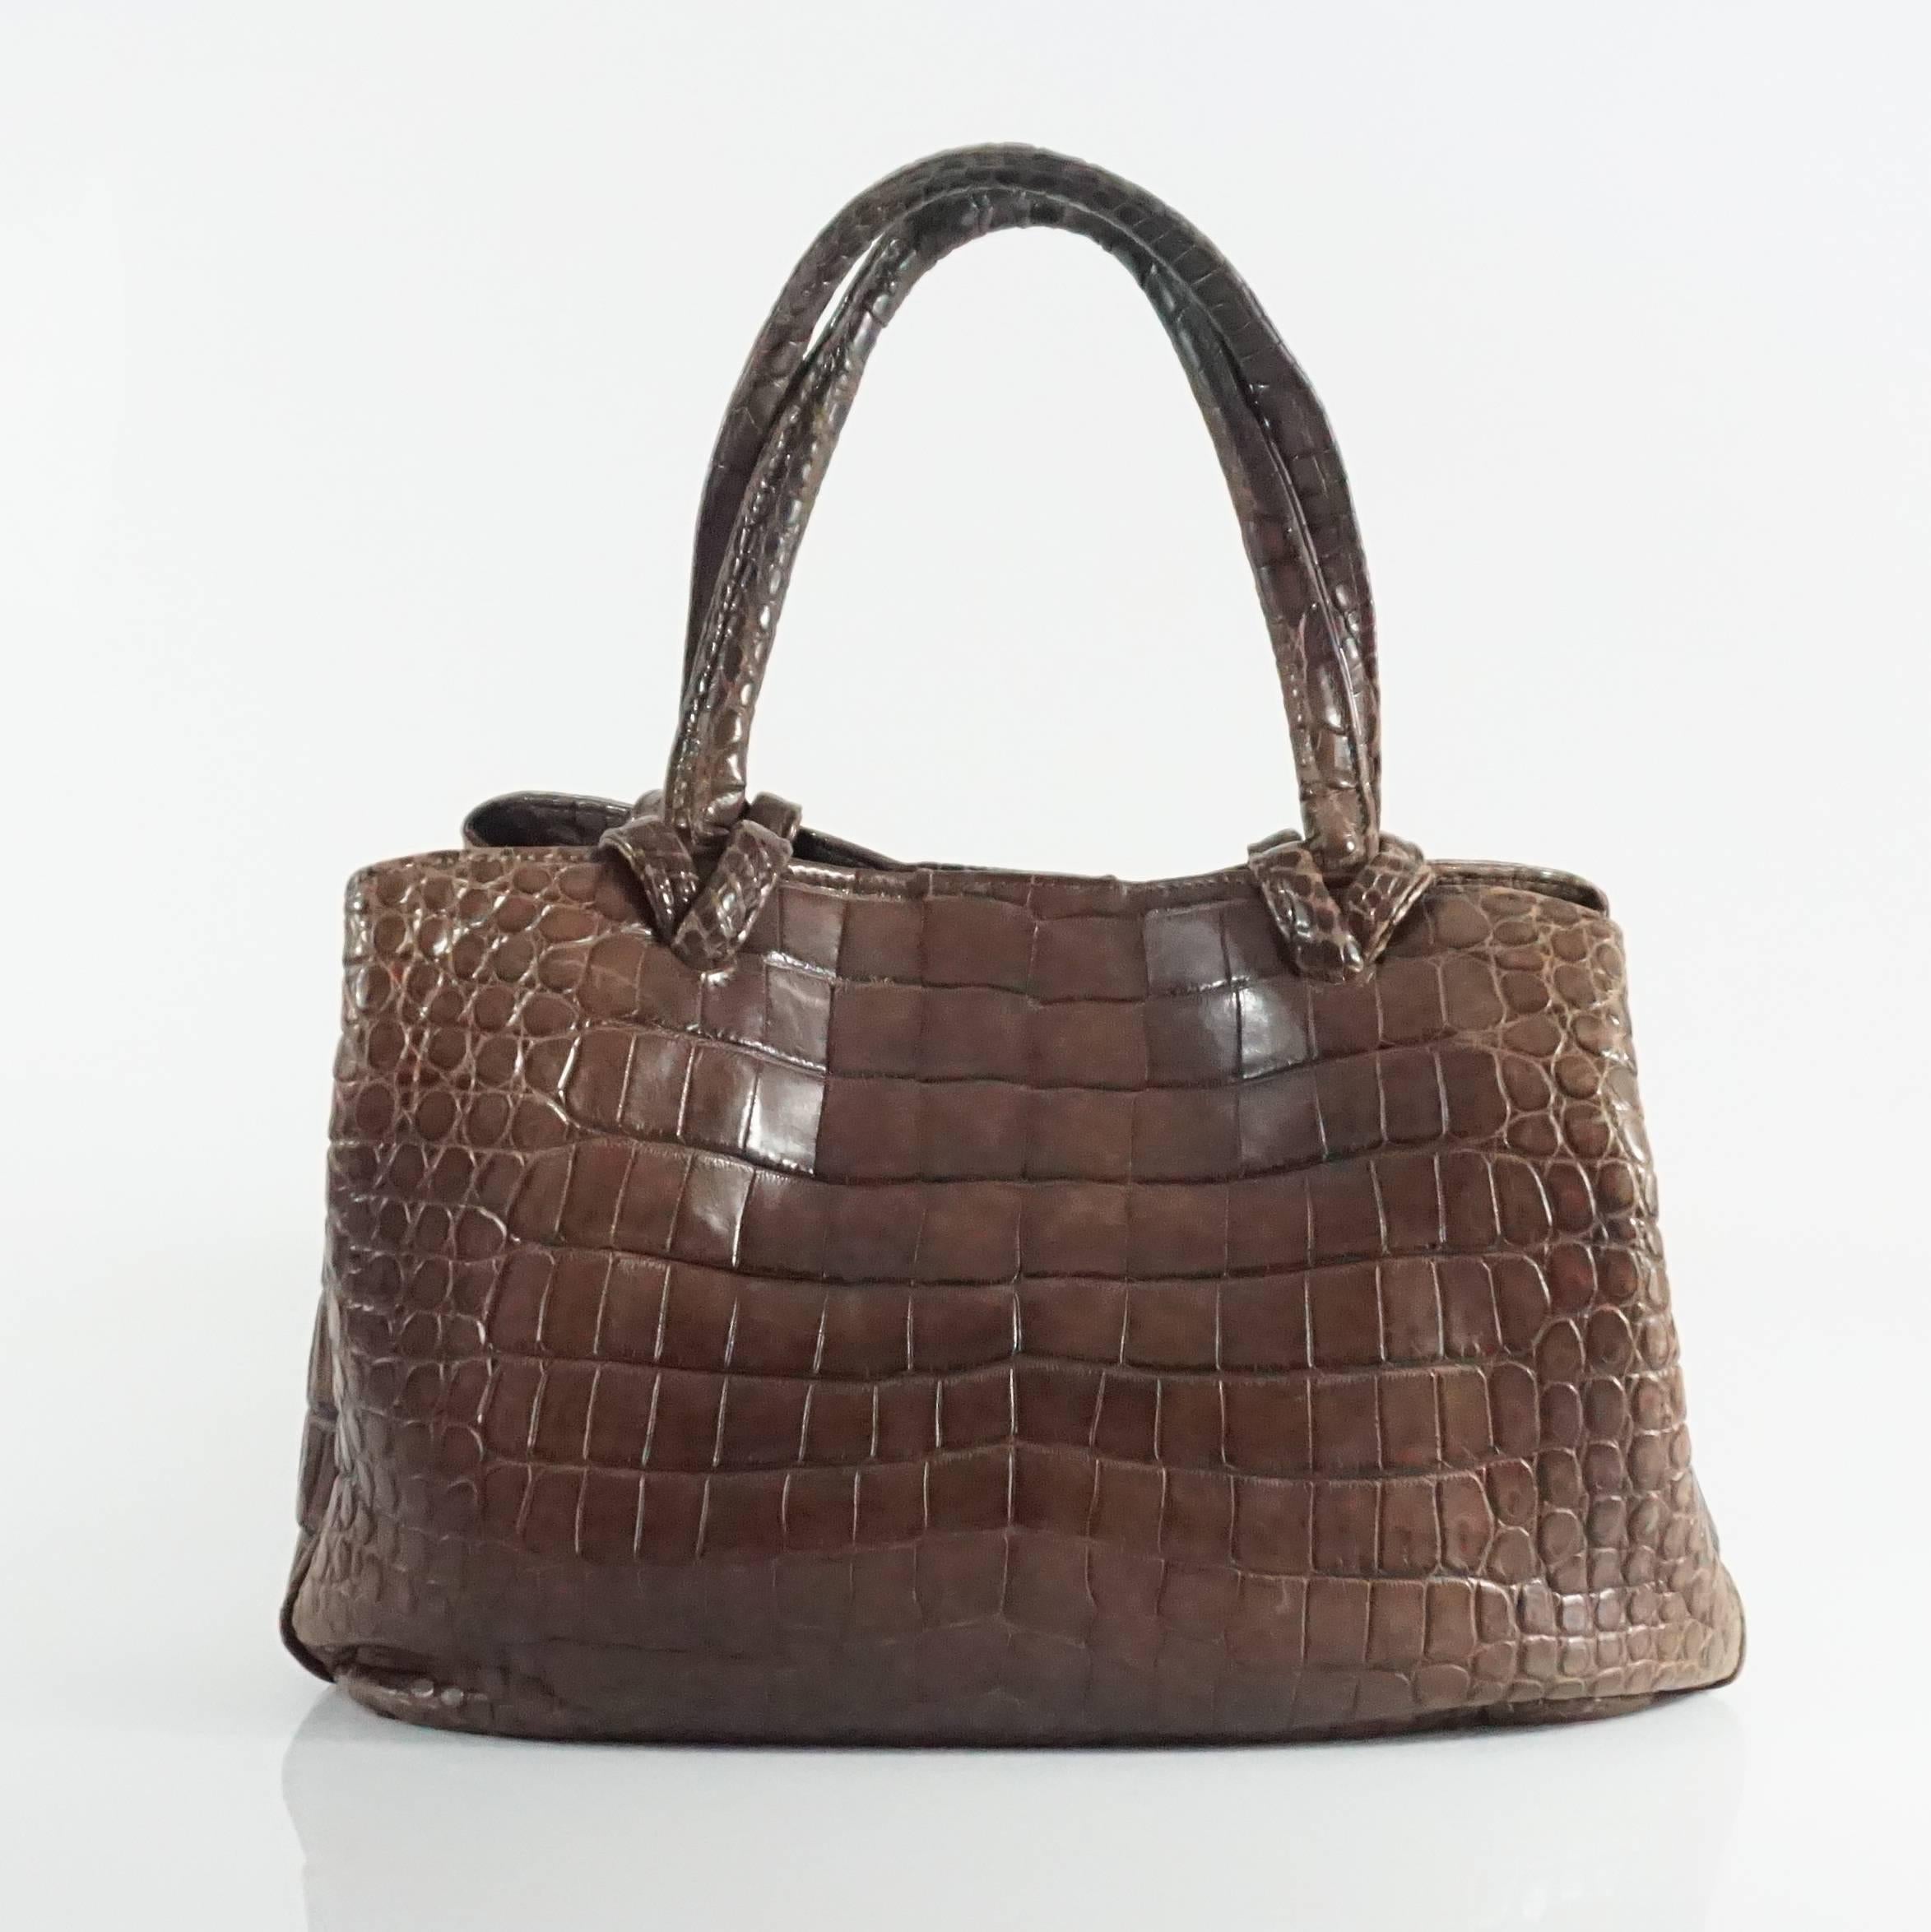 This Giorgio's brown alligator bag is a staple piece that has a long crossbody strap. It has a more slouchy style with three open compartments and two zipper compartments The bag also has 2 sets of credit card slots and a small compartment on the